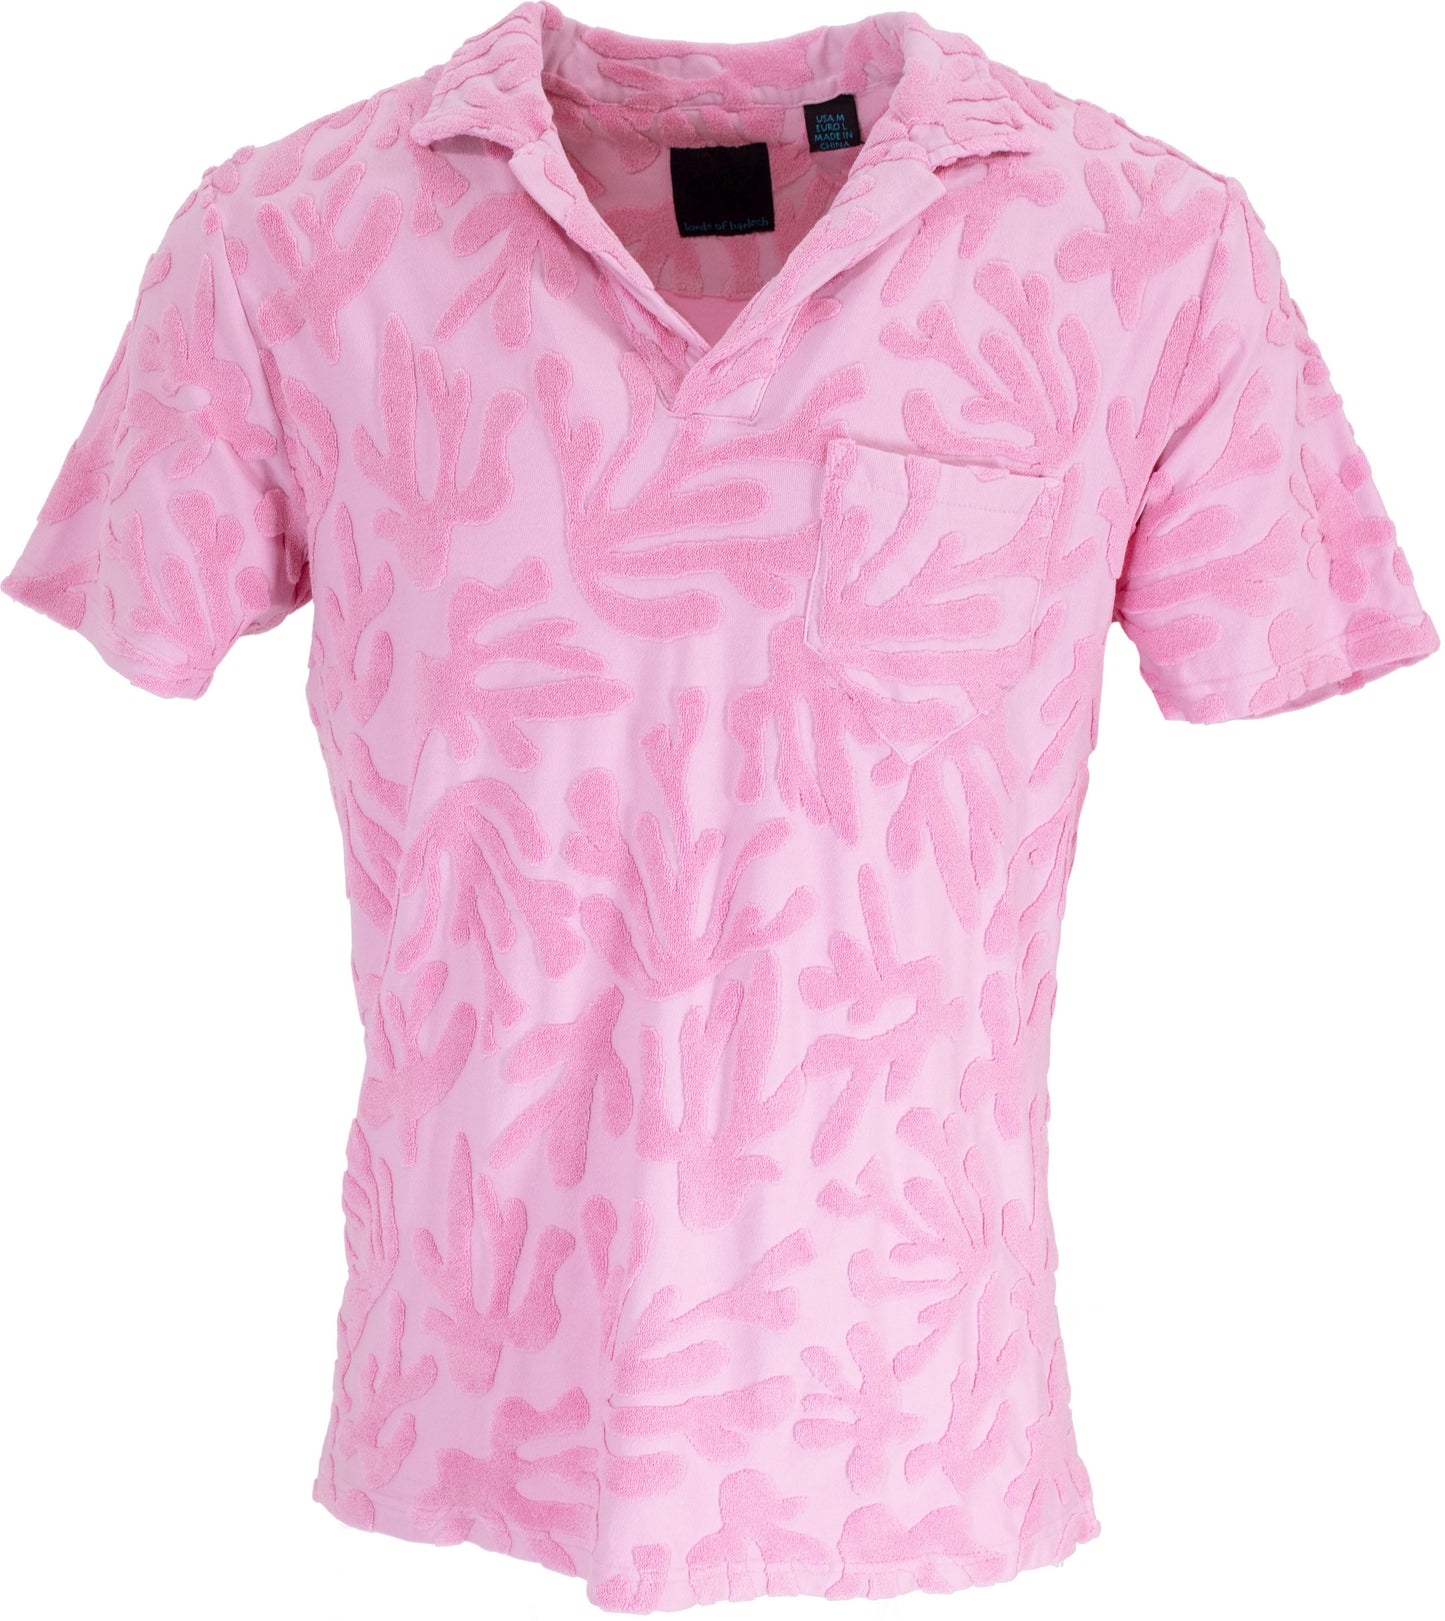 JOHNNY CORAL TOWEL POLO SHIRT IN PINK